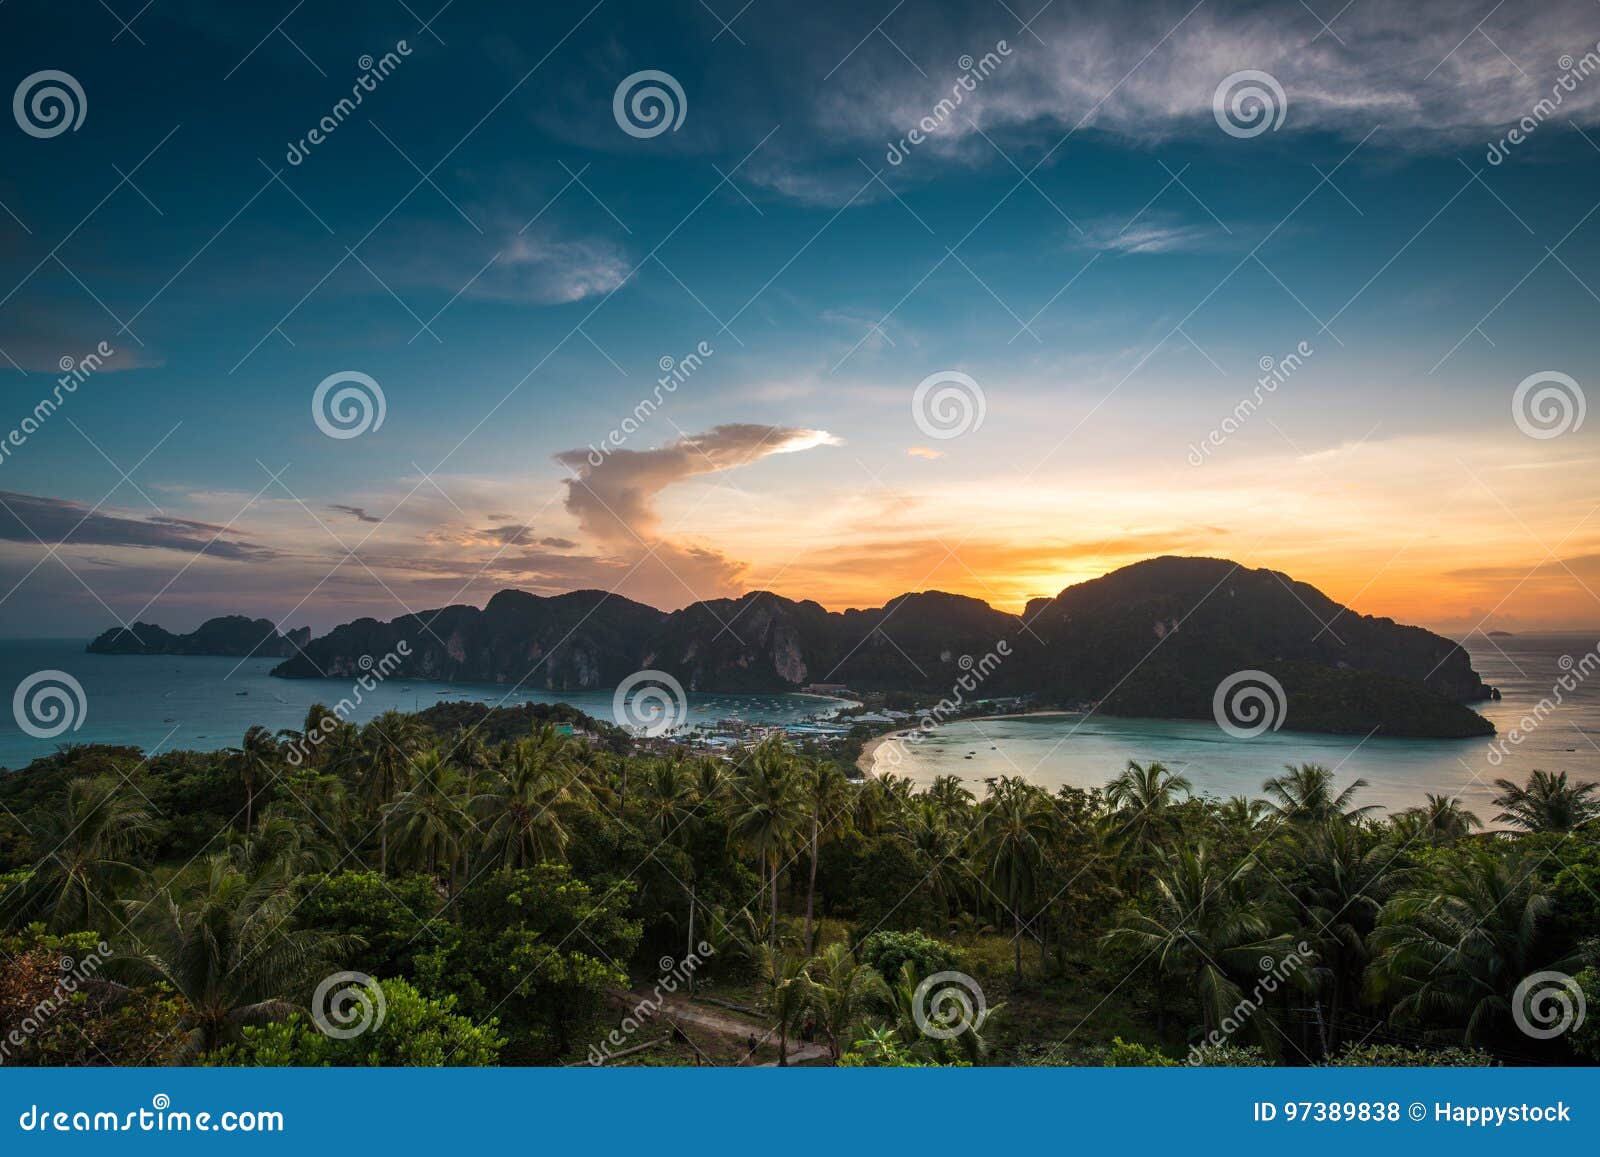 View Point of Phi Phi Island at Sunset Time, Krabi, Thailand Photo - Image point, 97389838